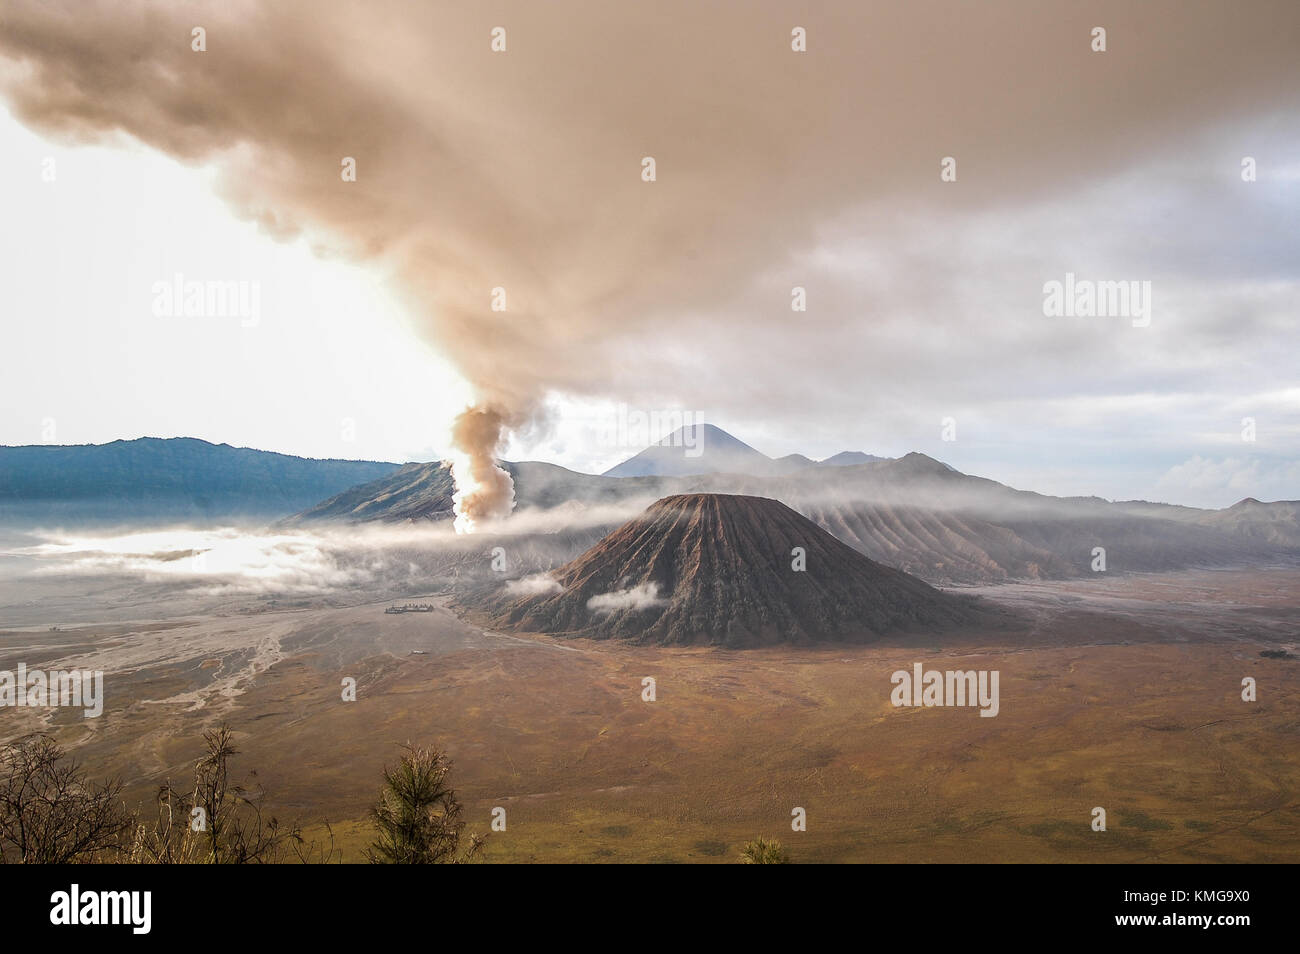 Volcanic ash from the eruption of mount Bromo covering the sky. Stock Photo